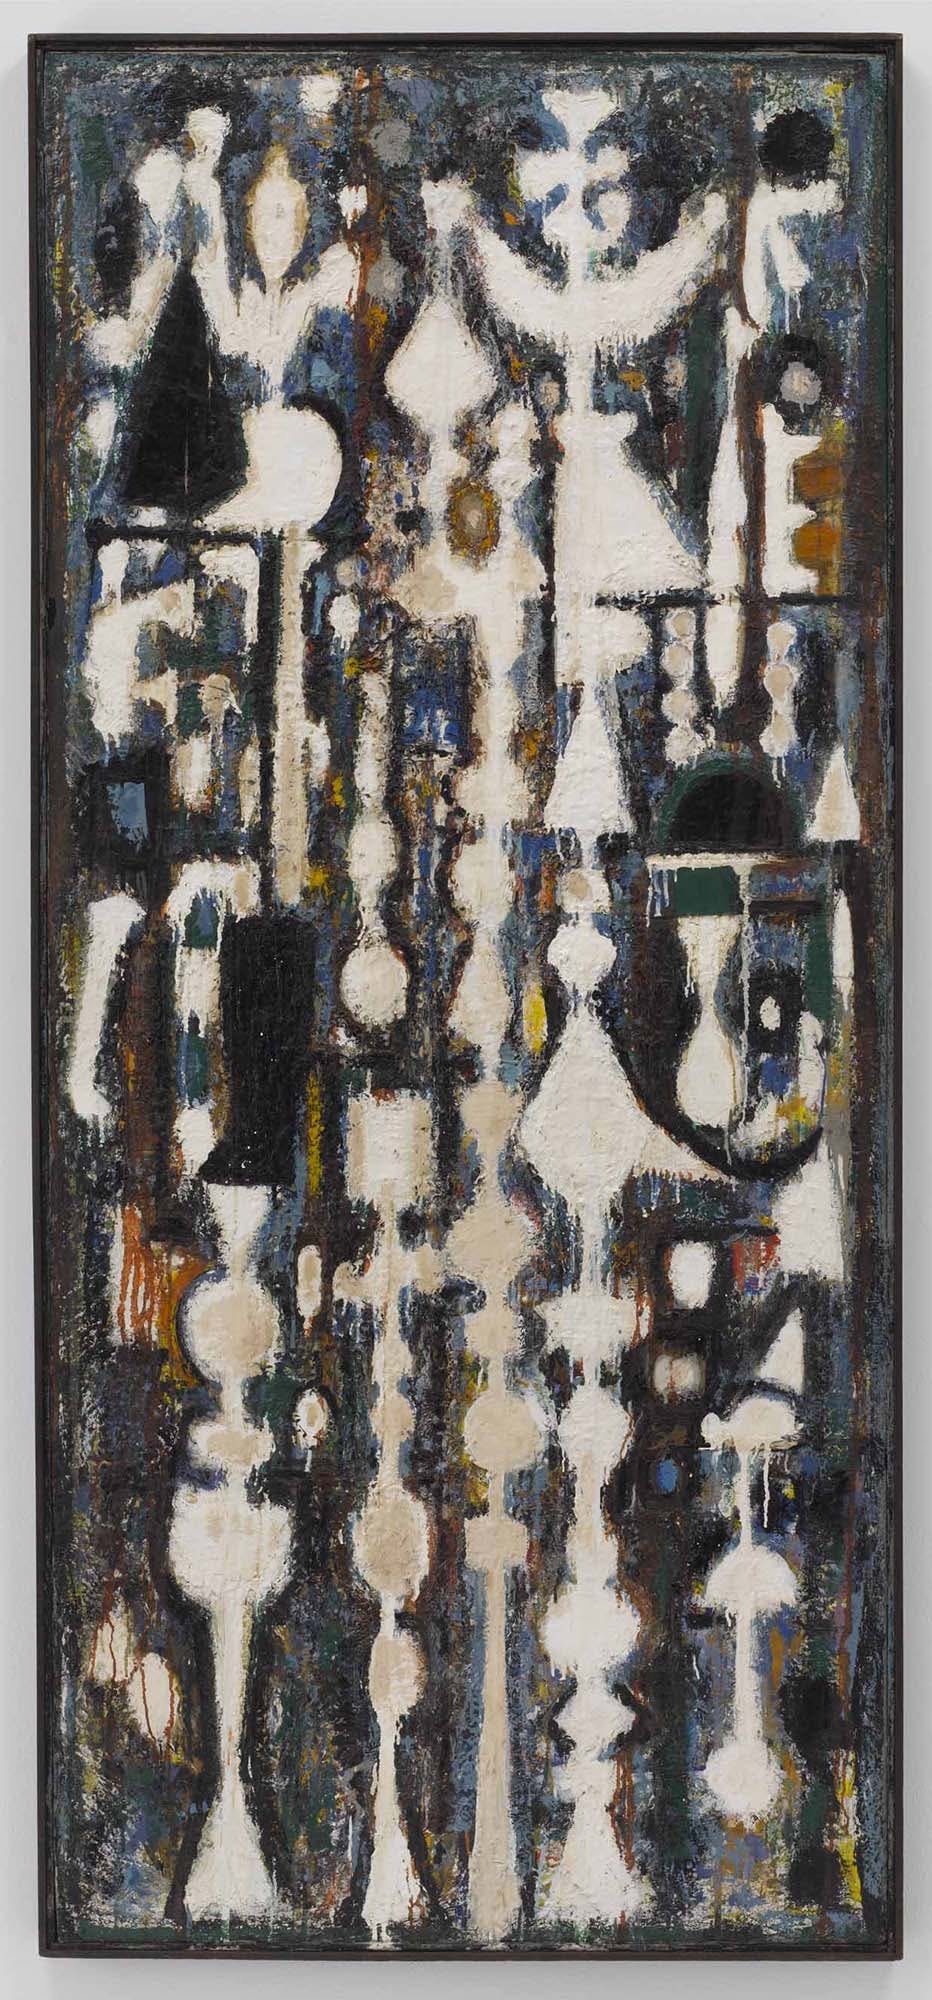 Pillars of Odysseus
1949
Oil enamel, and collage on canvas
80 x 35 in. (203.2 x 88.9 cm)
 – The Richard Pousette-Dart Foundation